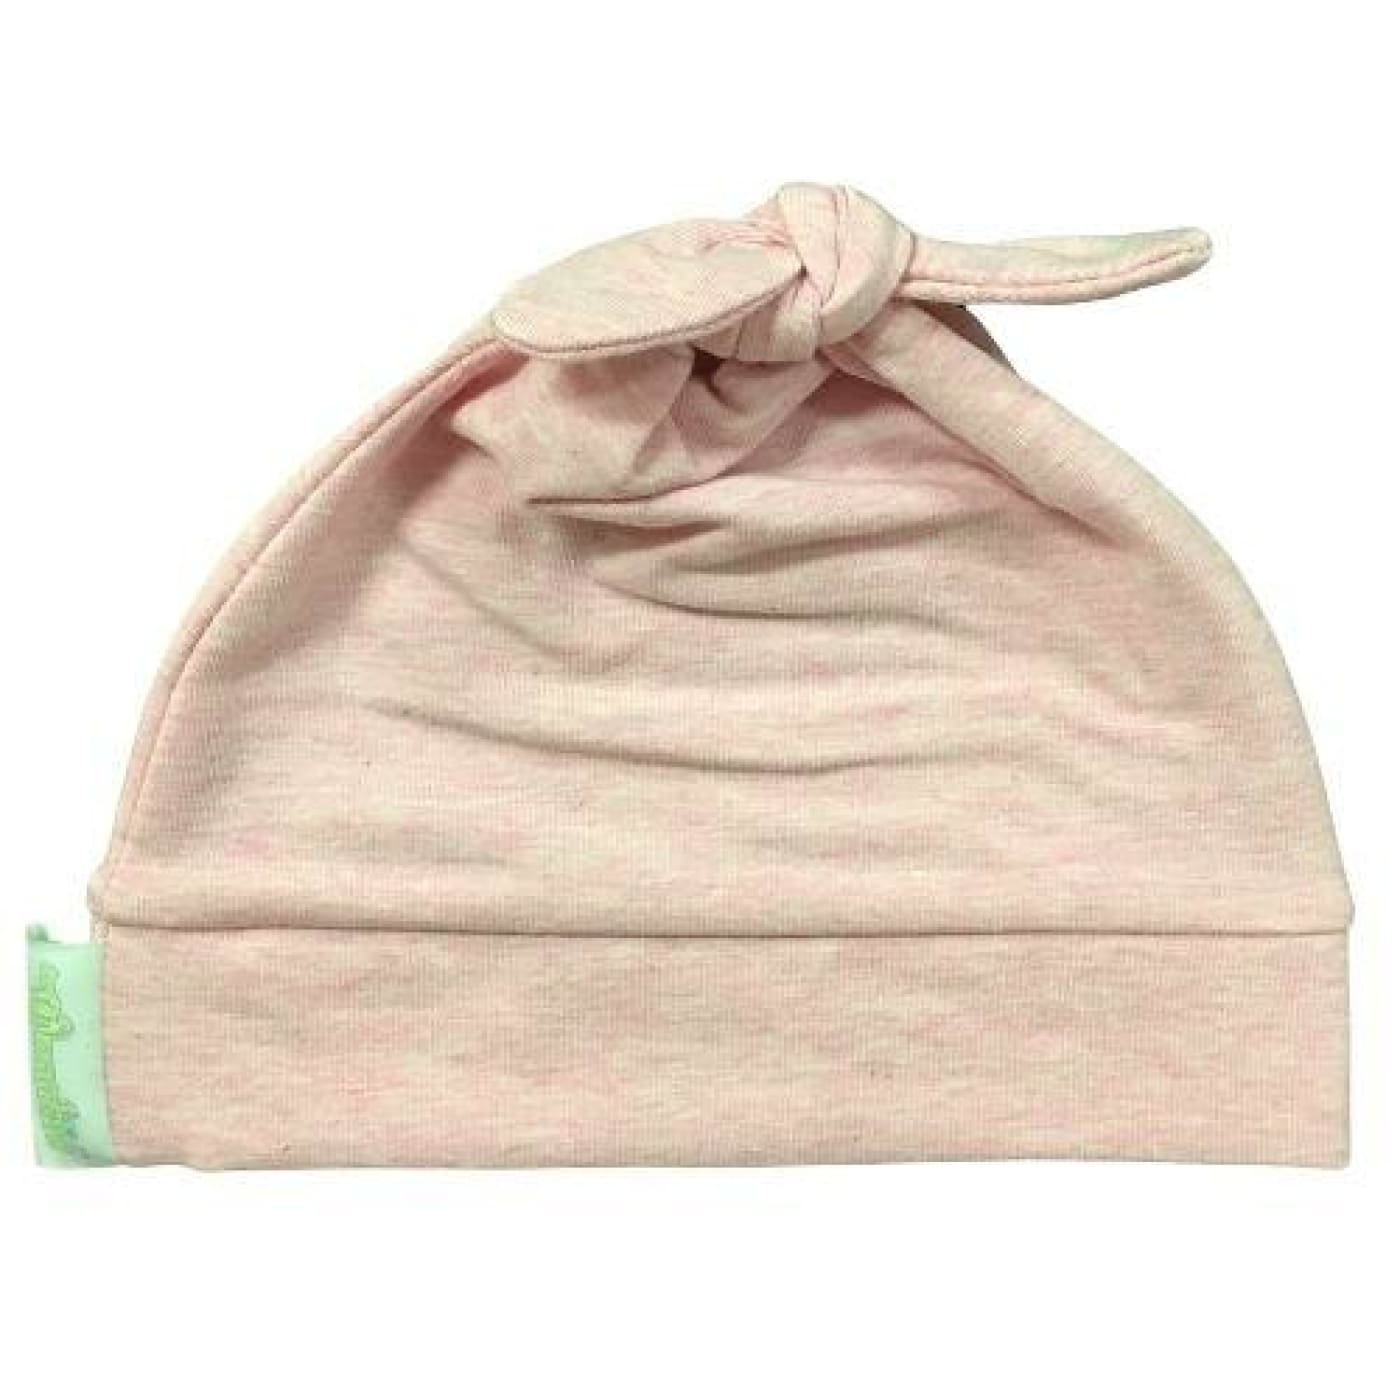 Woombie Cotton Beanie - Pink Posey 0-6M - 0-6m / Pink Posey - BABY & TODDLER CLOTHING - BEANIES/HATS